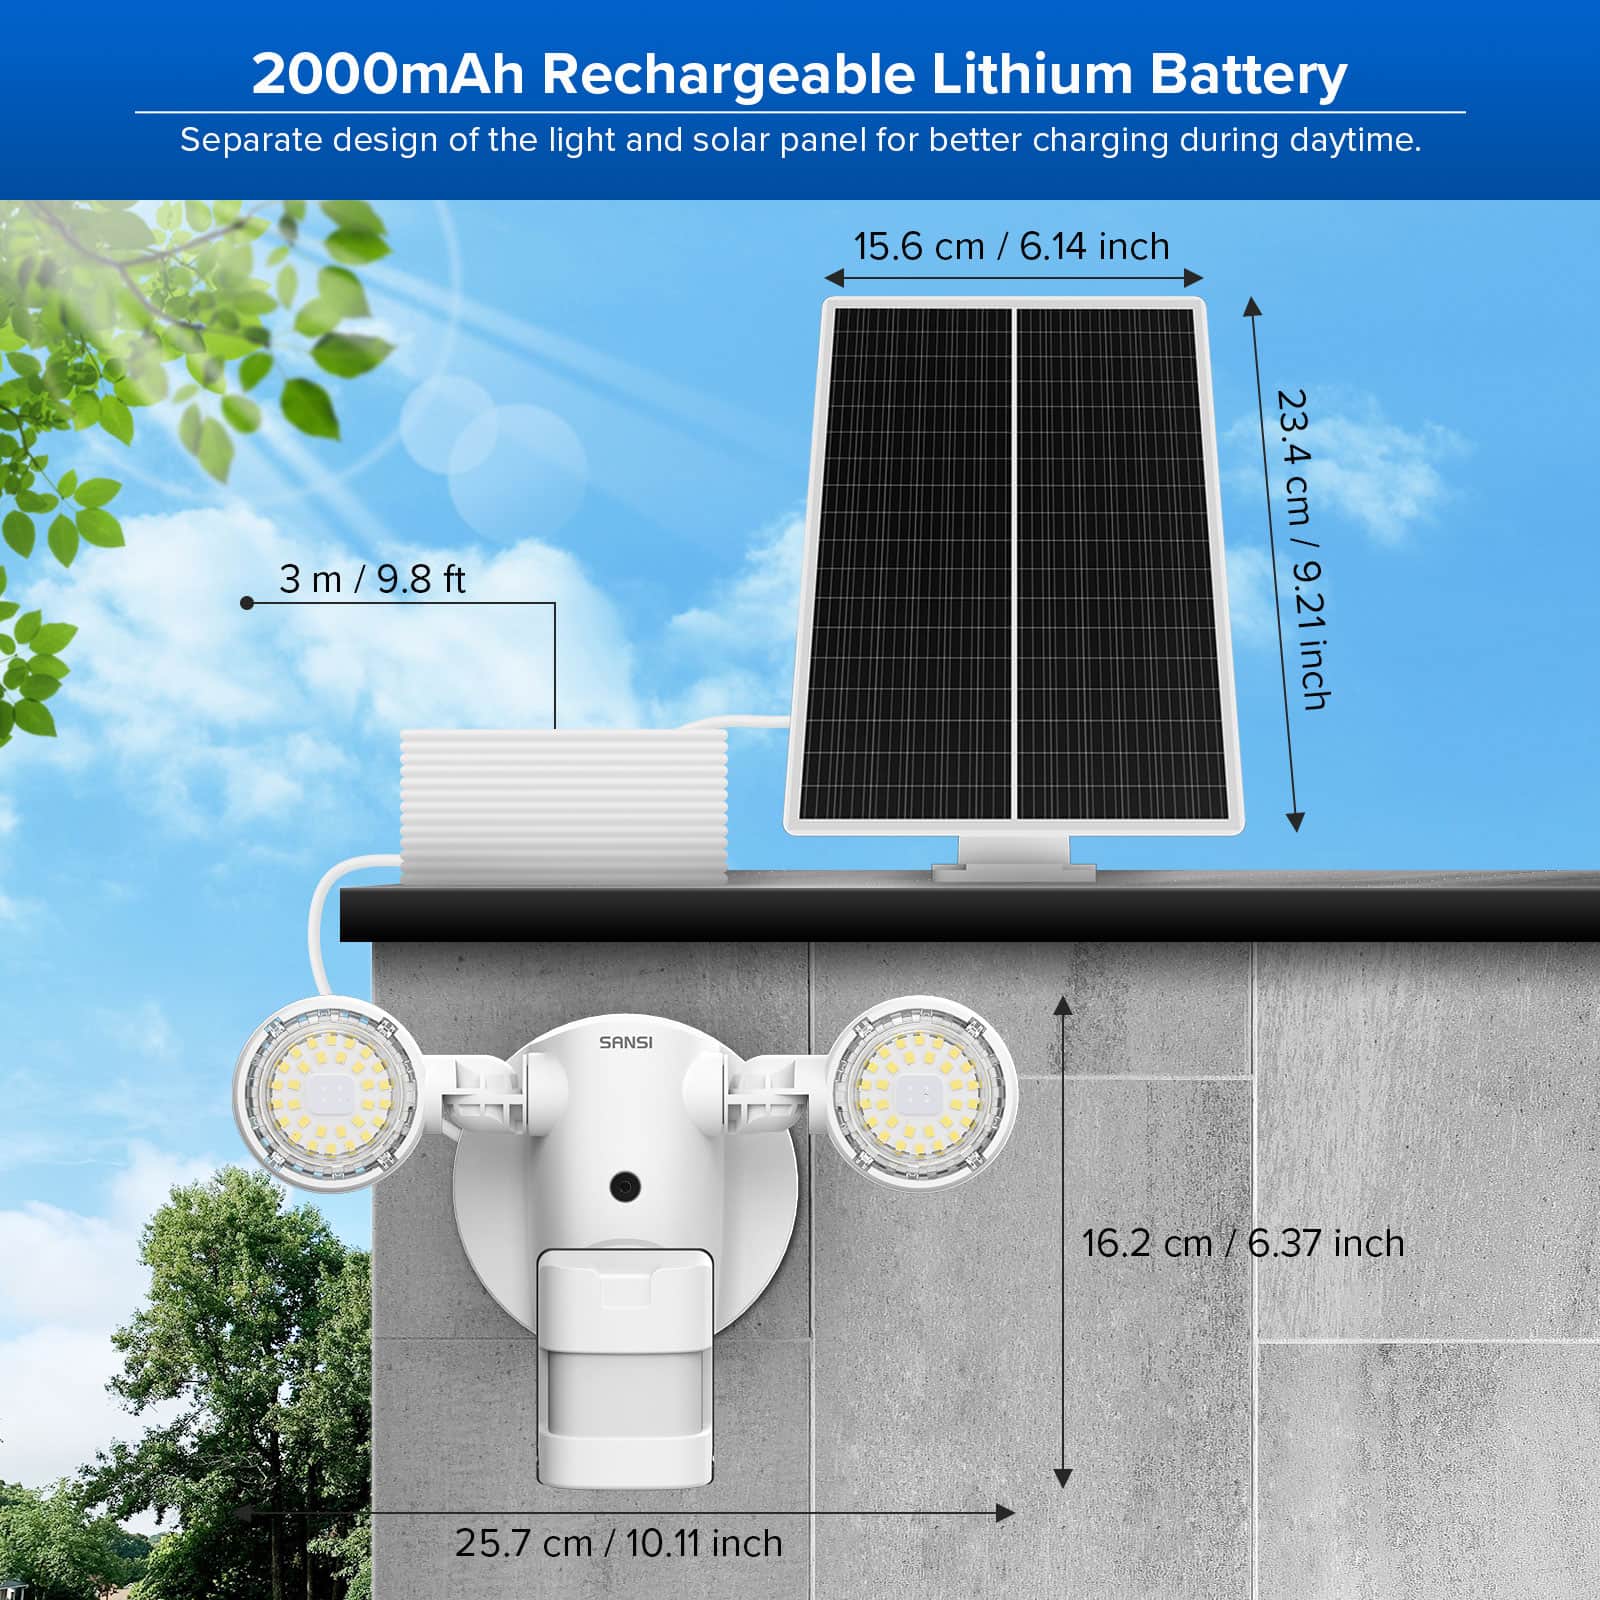 2000mAh Rechargeable Lithium Battery：Separate design of the light and solar panel for better charging during daytime.